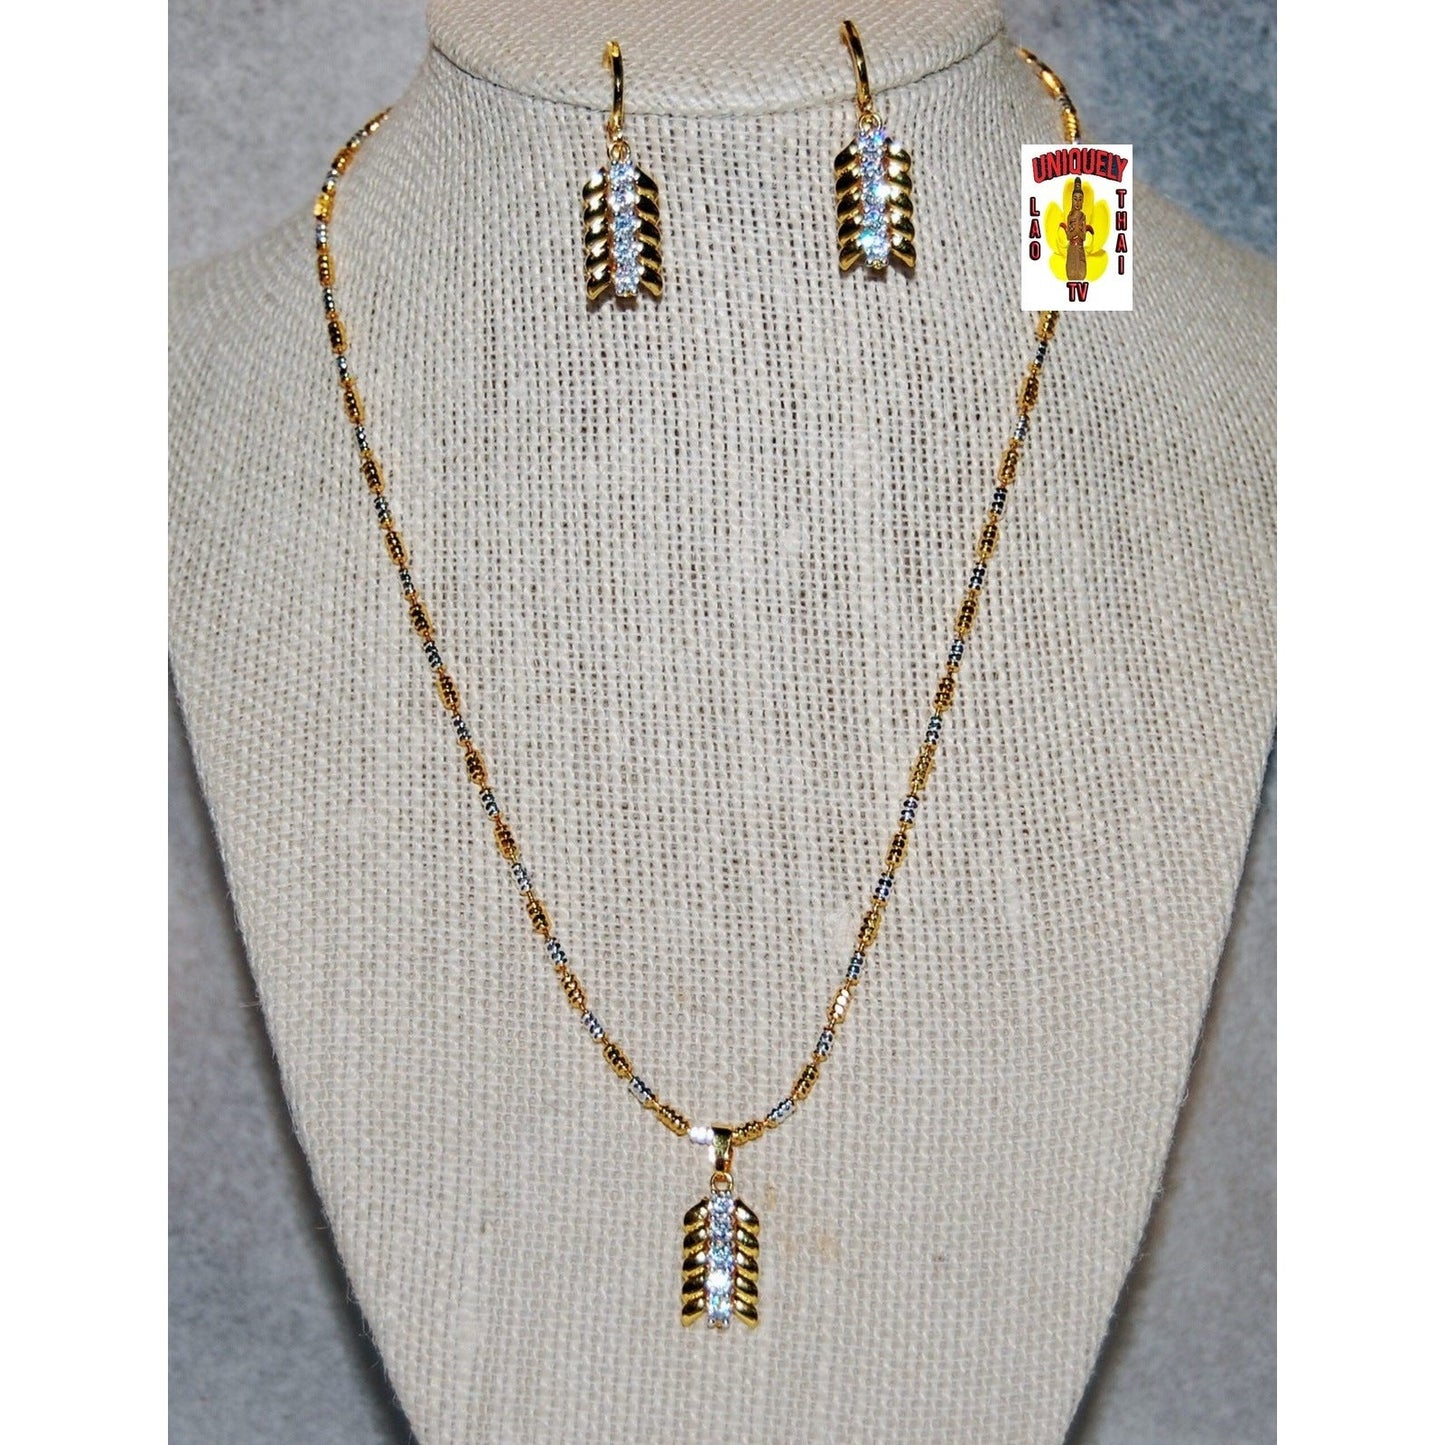 Gold-Plated Necklace Earring and Pendant Set JE-ST-04